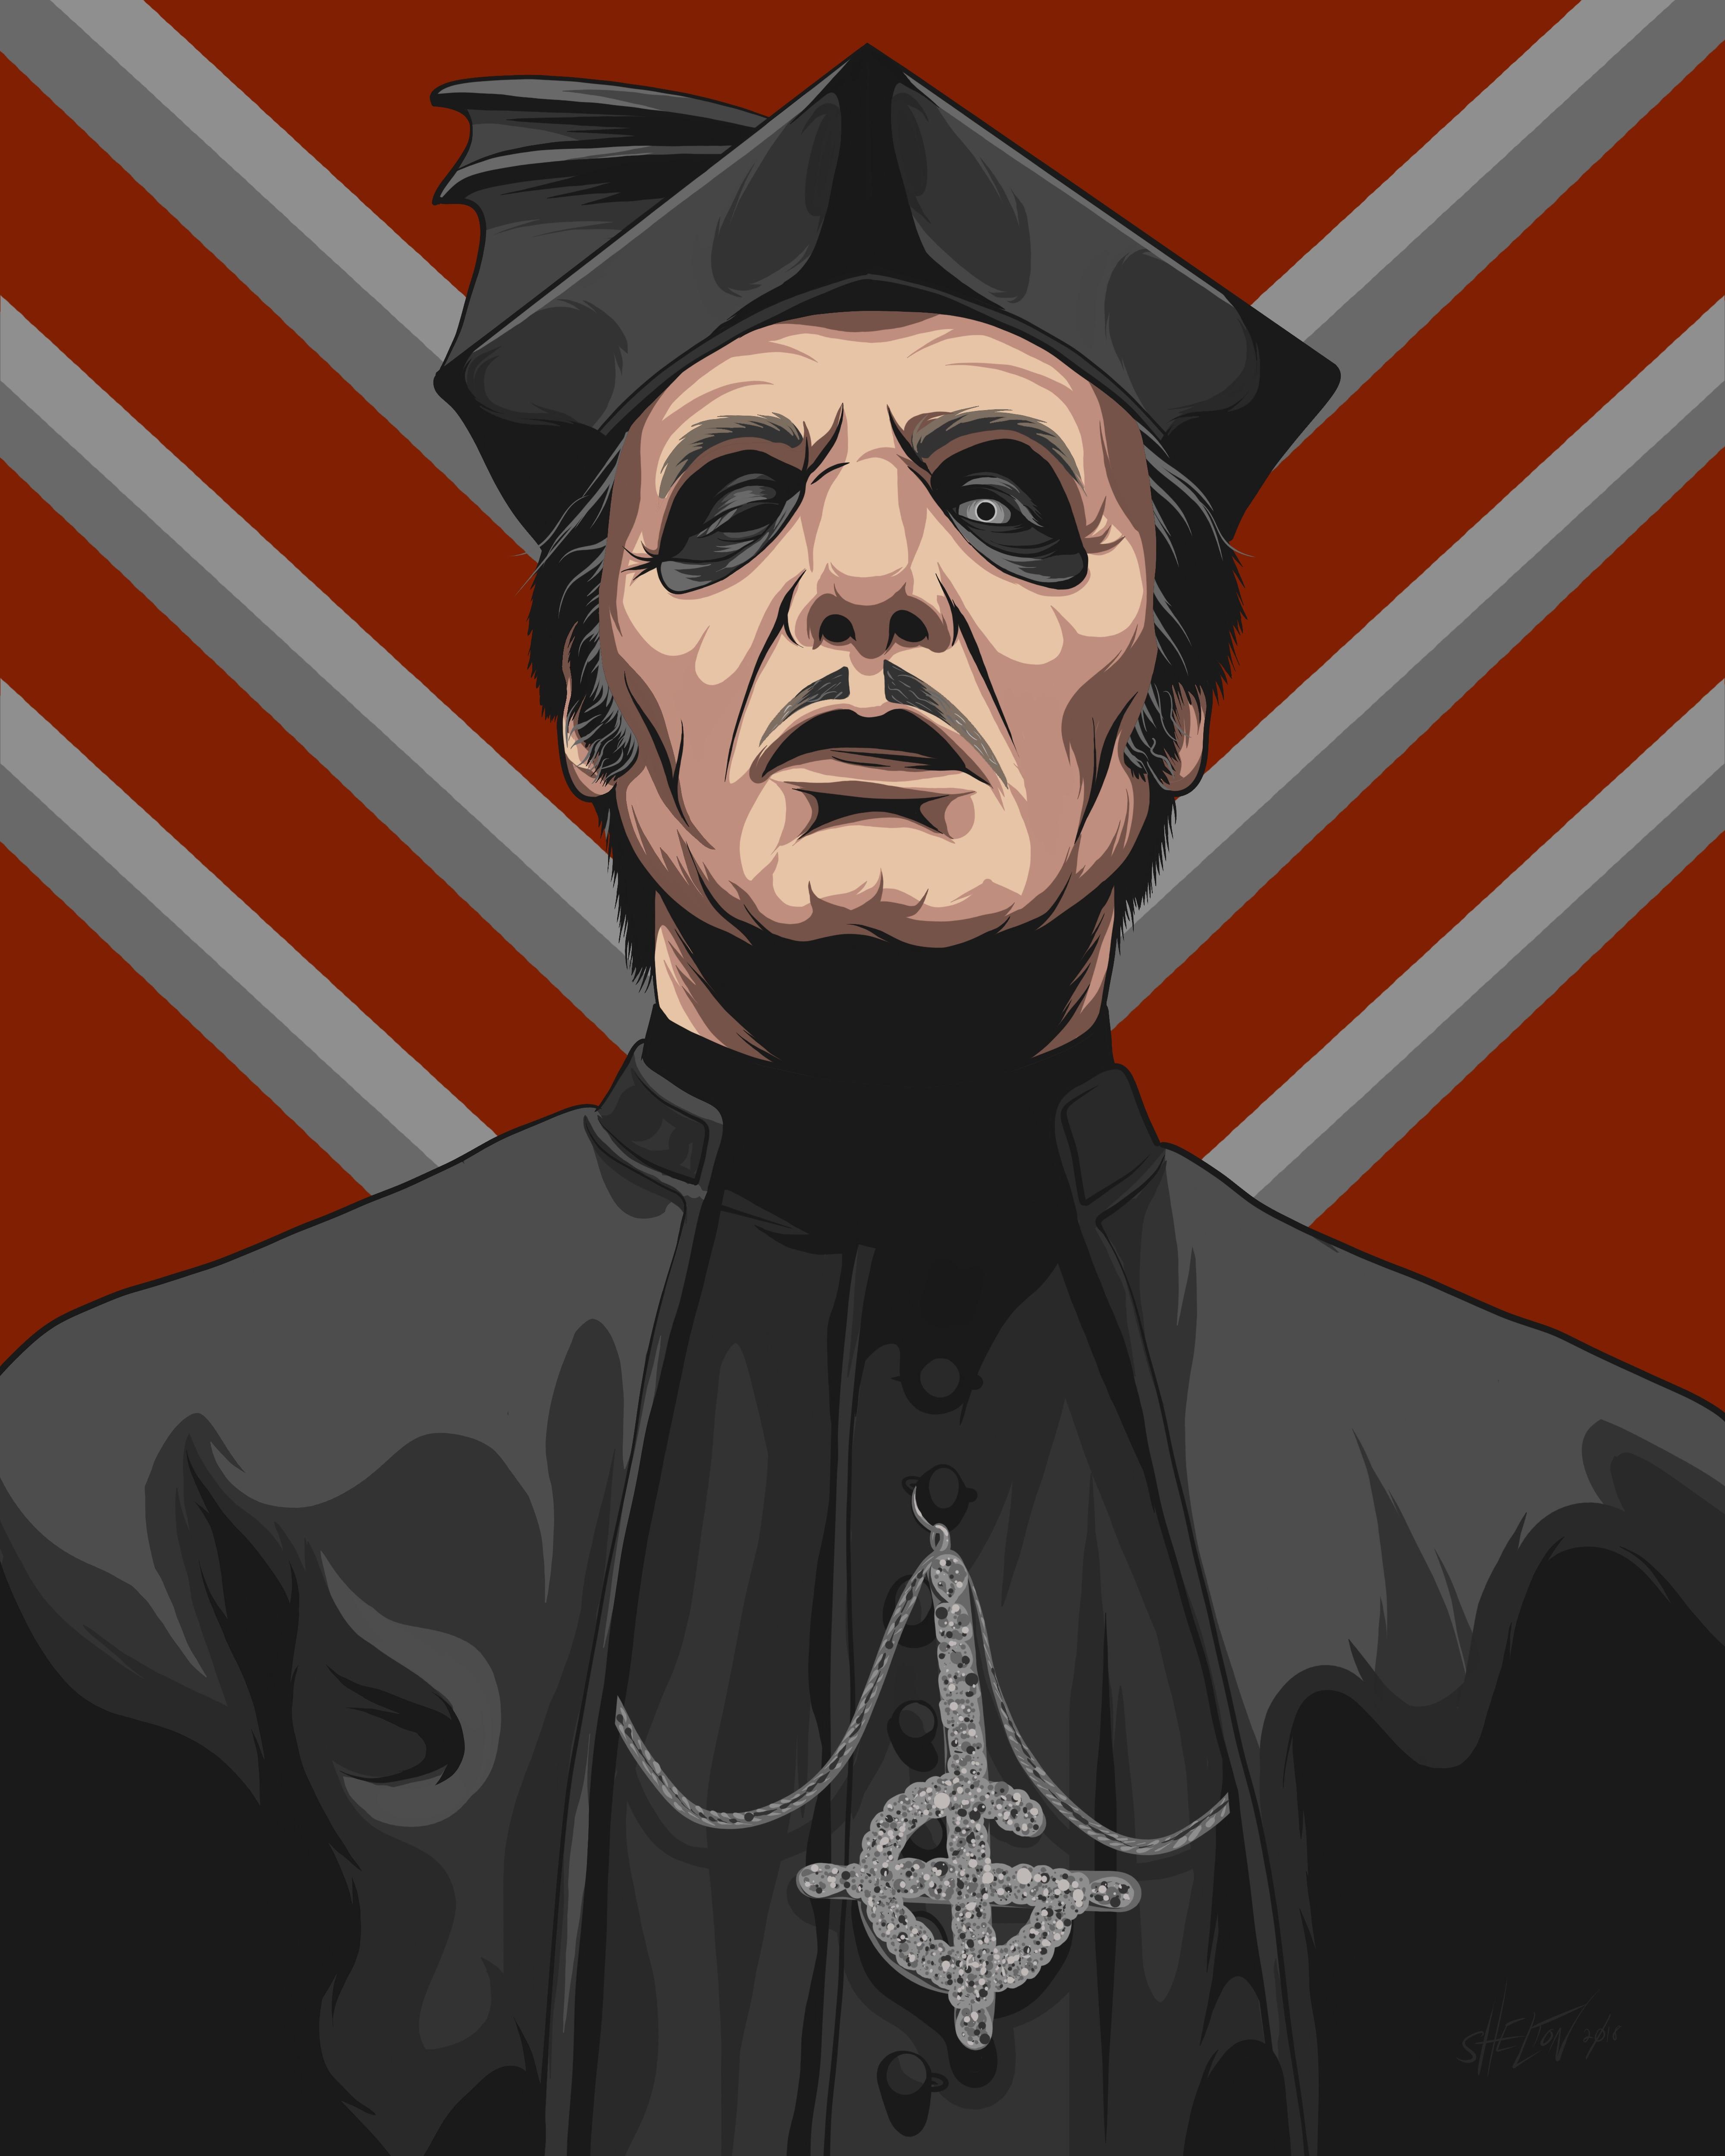 Cardinal Copia I made on my iPad Pro with Apple Pencil. Hope all you